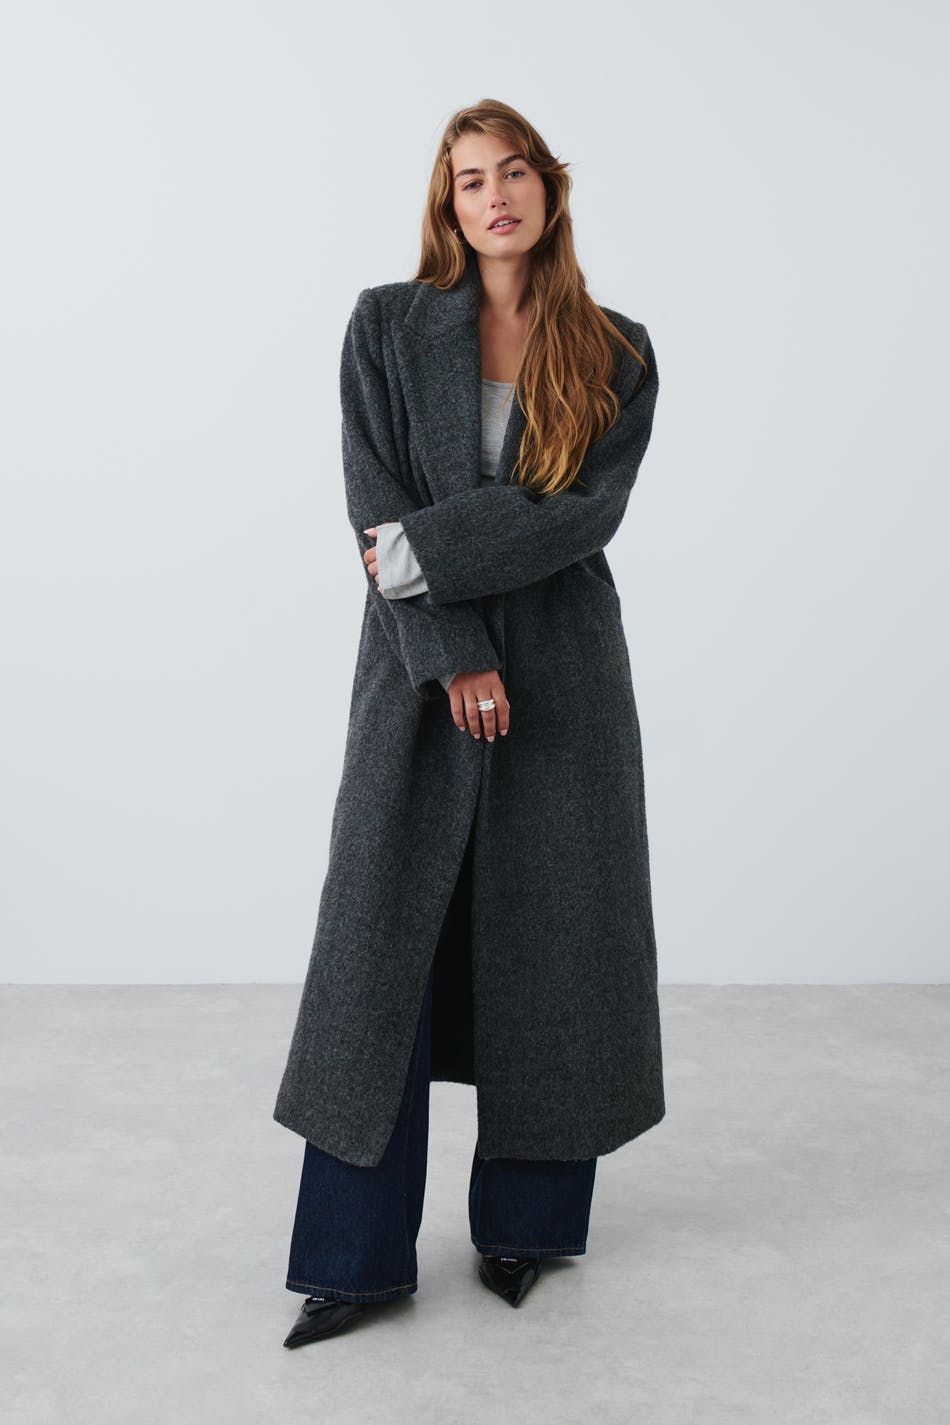 Fuzzy tailored coat - Gina Tricot | Gina Tricot SE